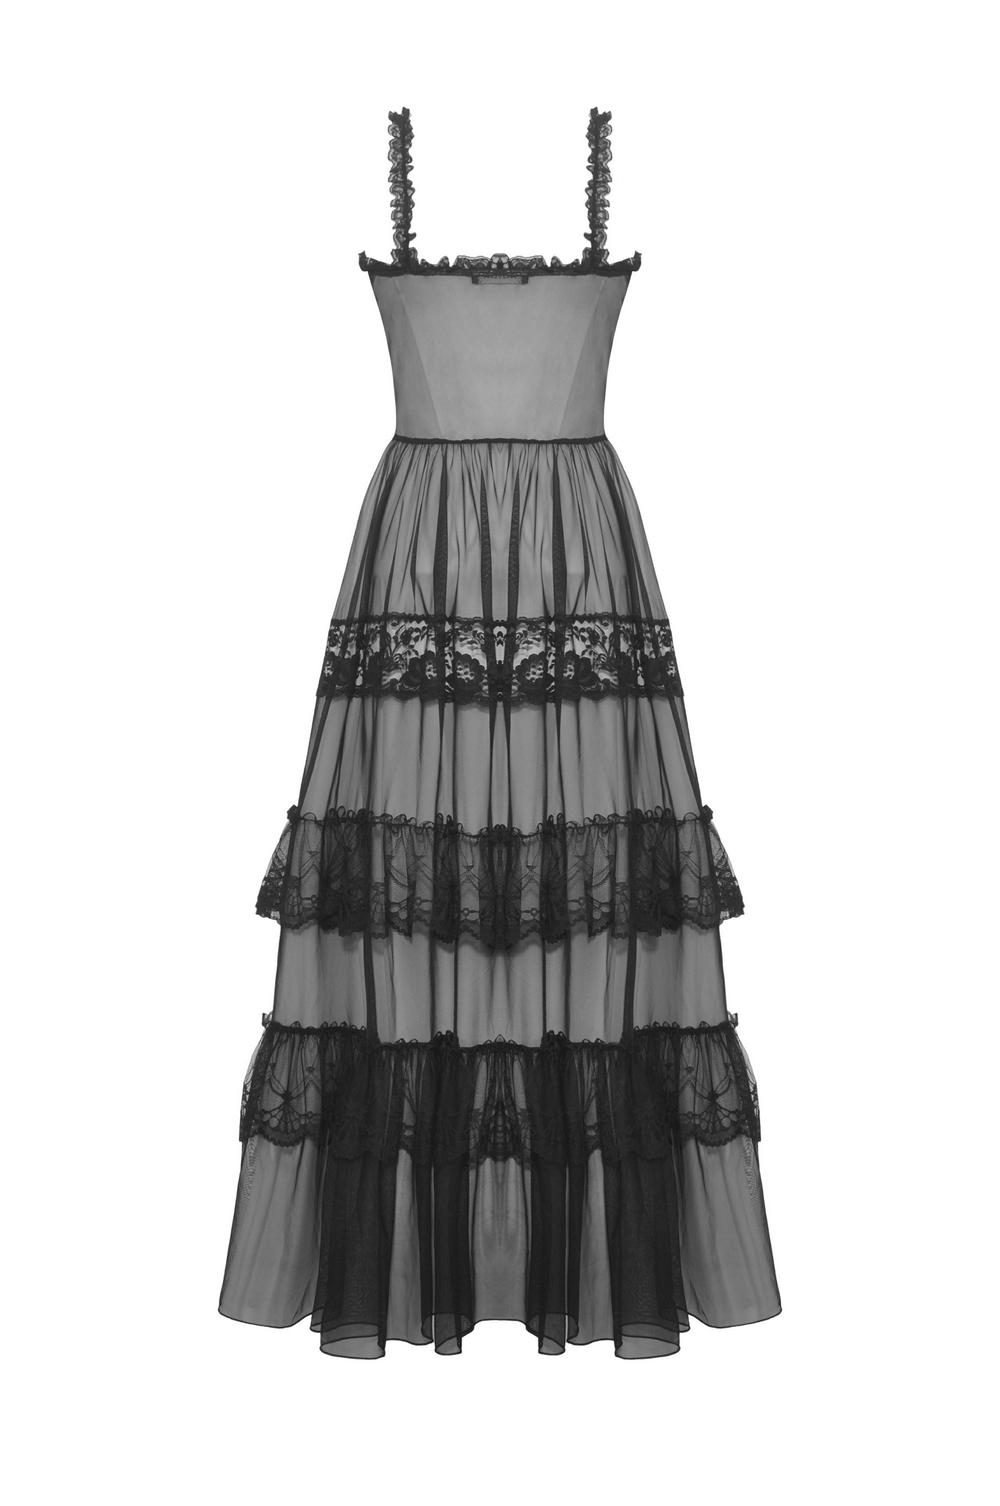 Victorian-Inspired Lace Dress - Dark and Romantic